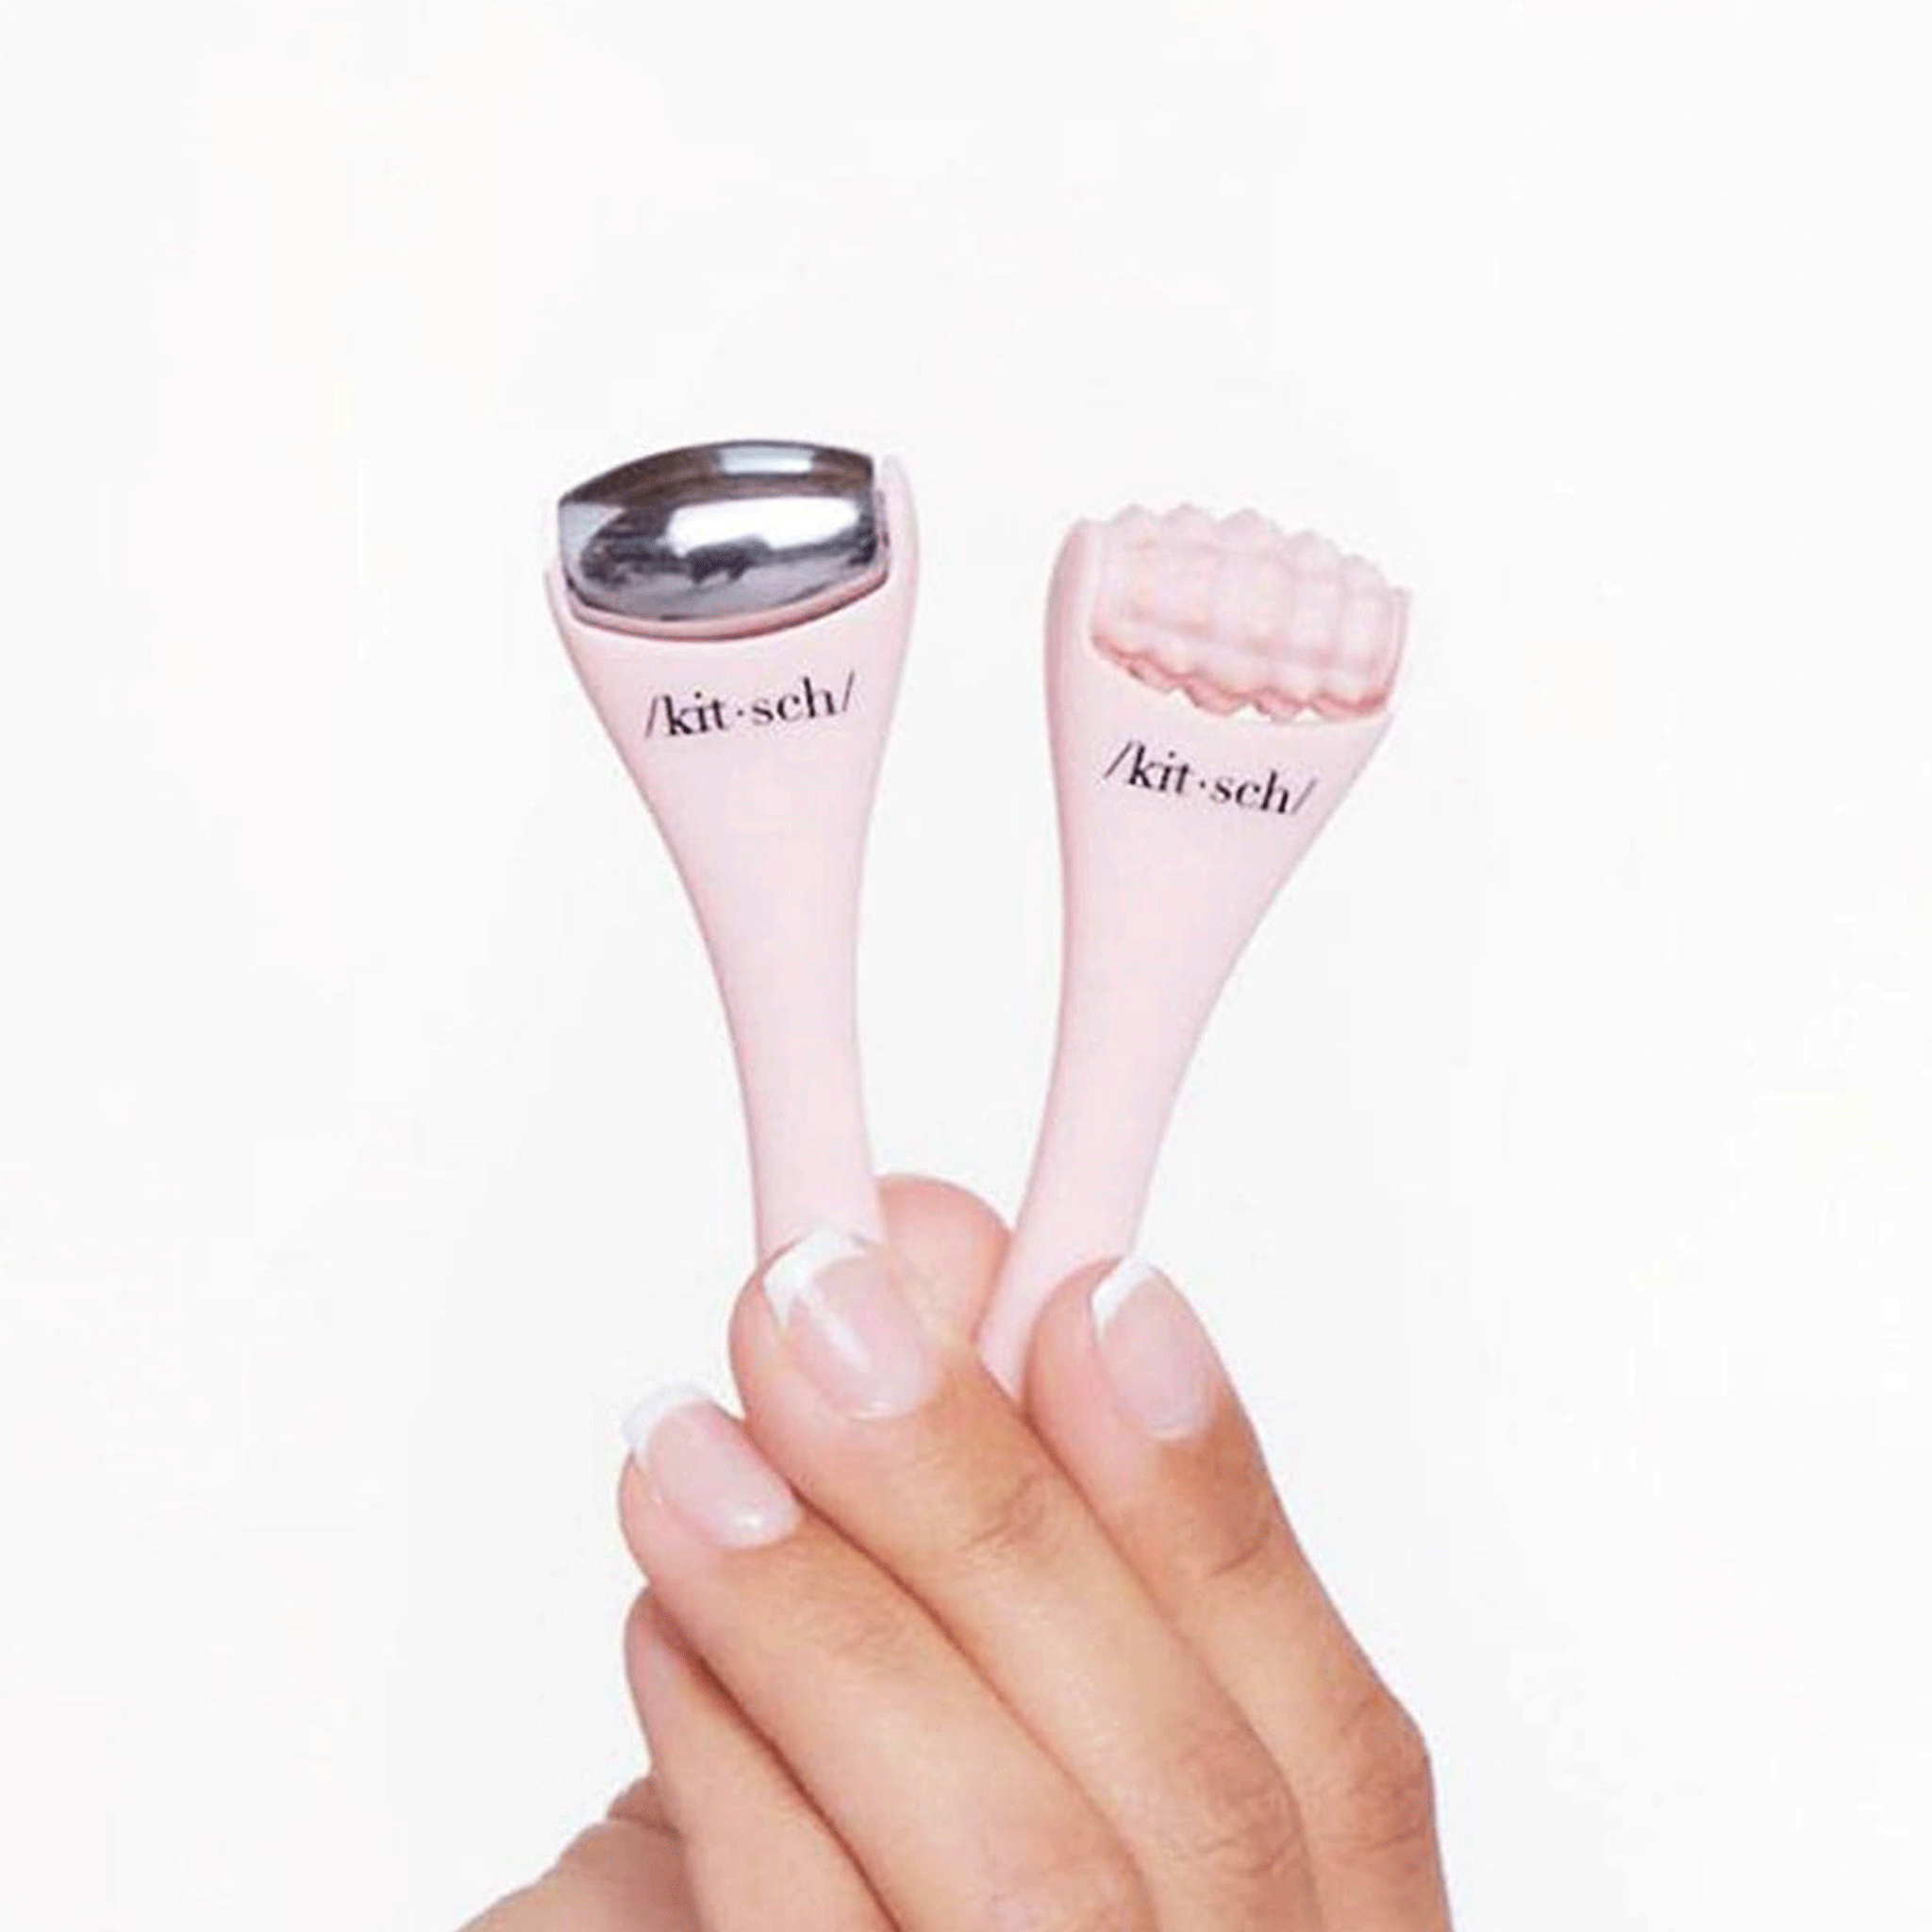 On a white background is a model&#39;s hand holding two mini facial massage tools. One with a smooth stainless steel roller and the other with a more textured light pink roller.